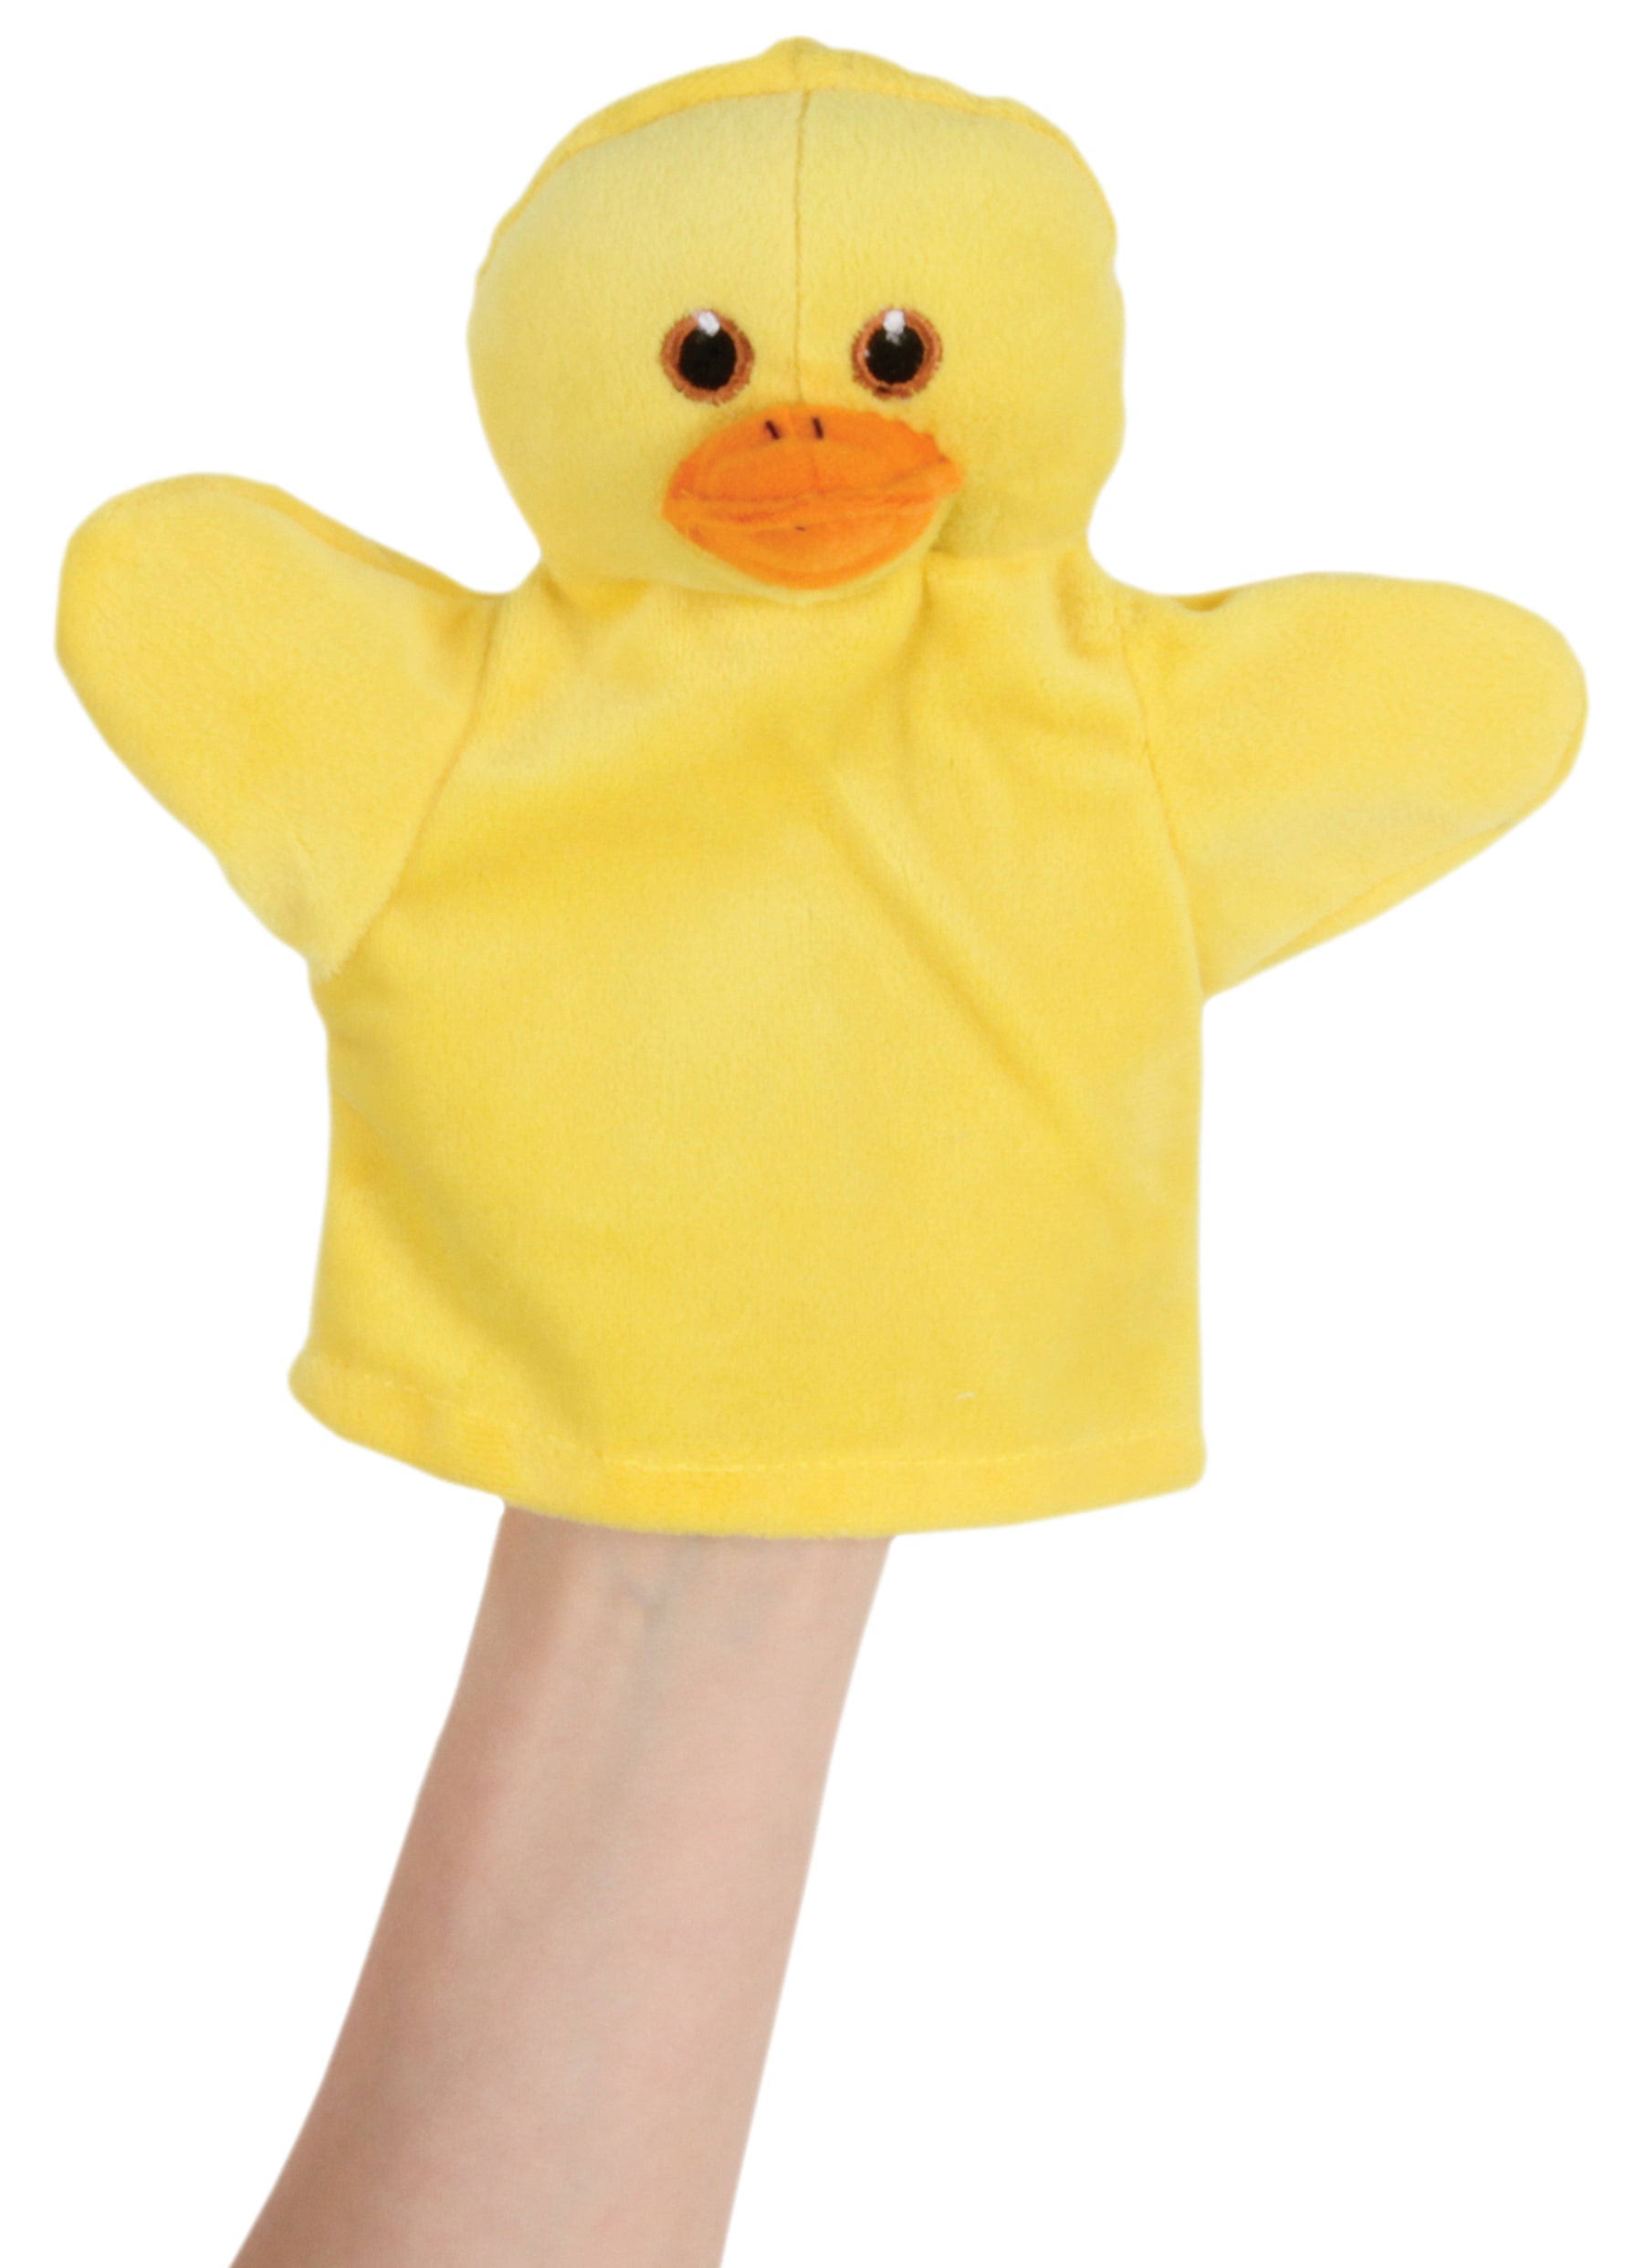 Puppet Company My First Hand Puppet Duck - 7"